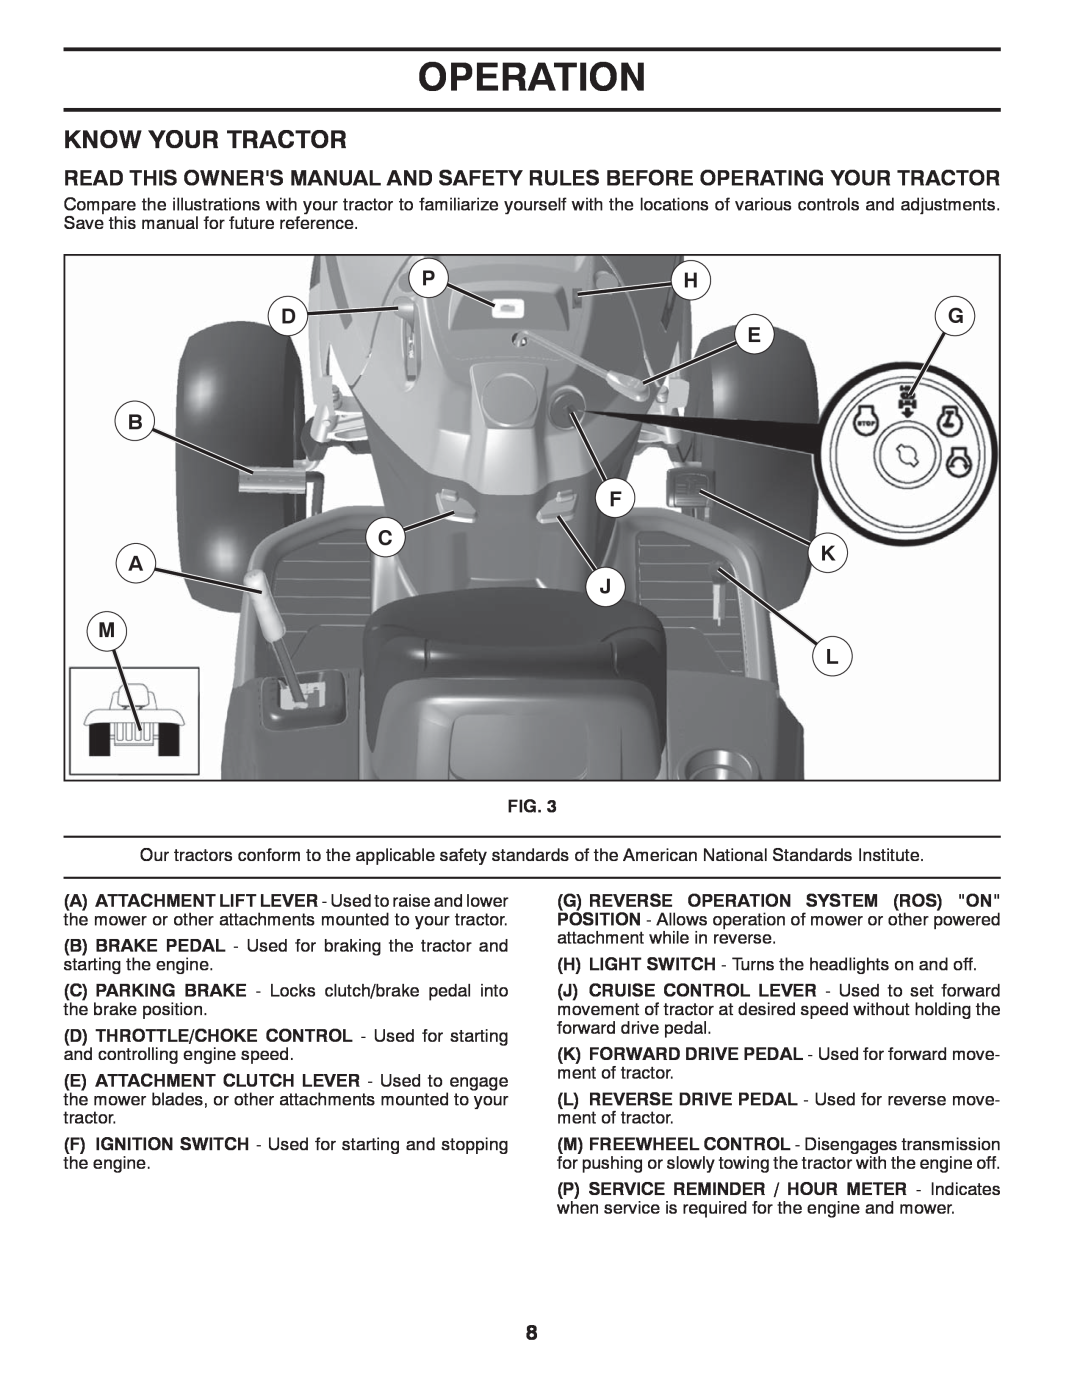 Husqvarna 96045000408, 532 42 20-50_R1 owner manual Know Your Tractor, Ph Dg E, Operation 